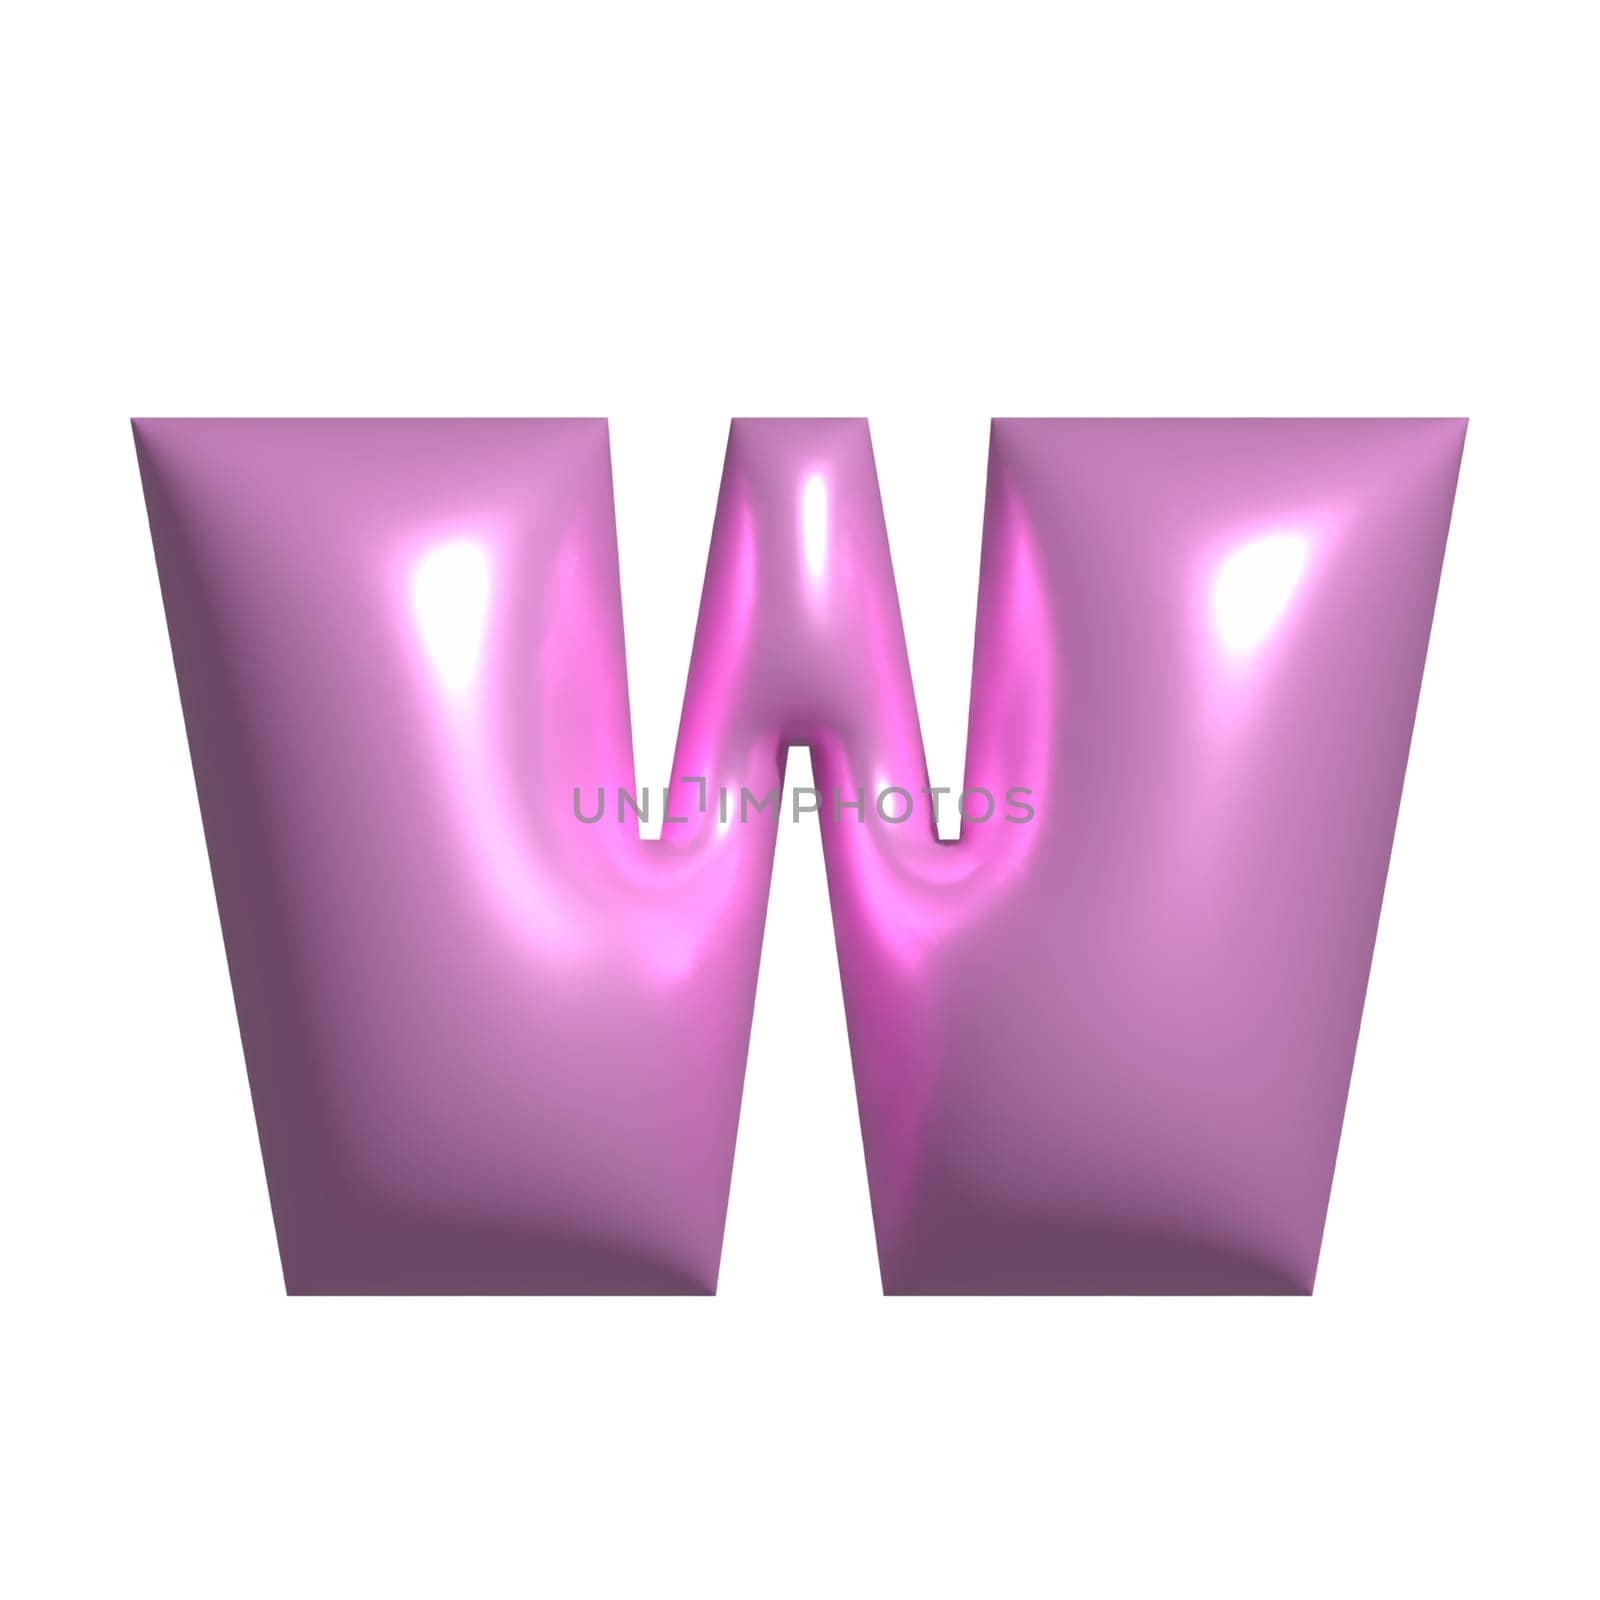 Pink metal shiny reflective letter W 3D illustration by Dustick